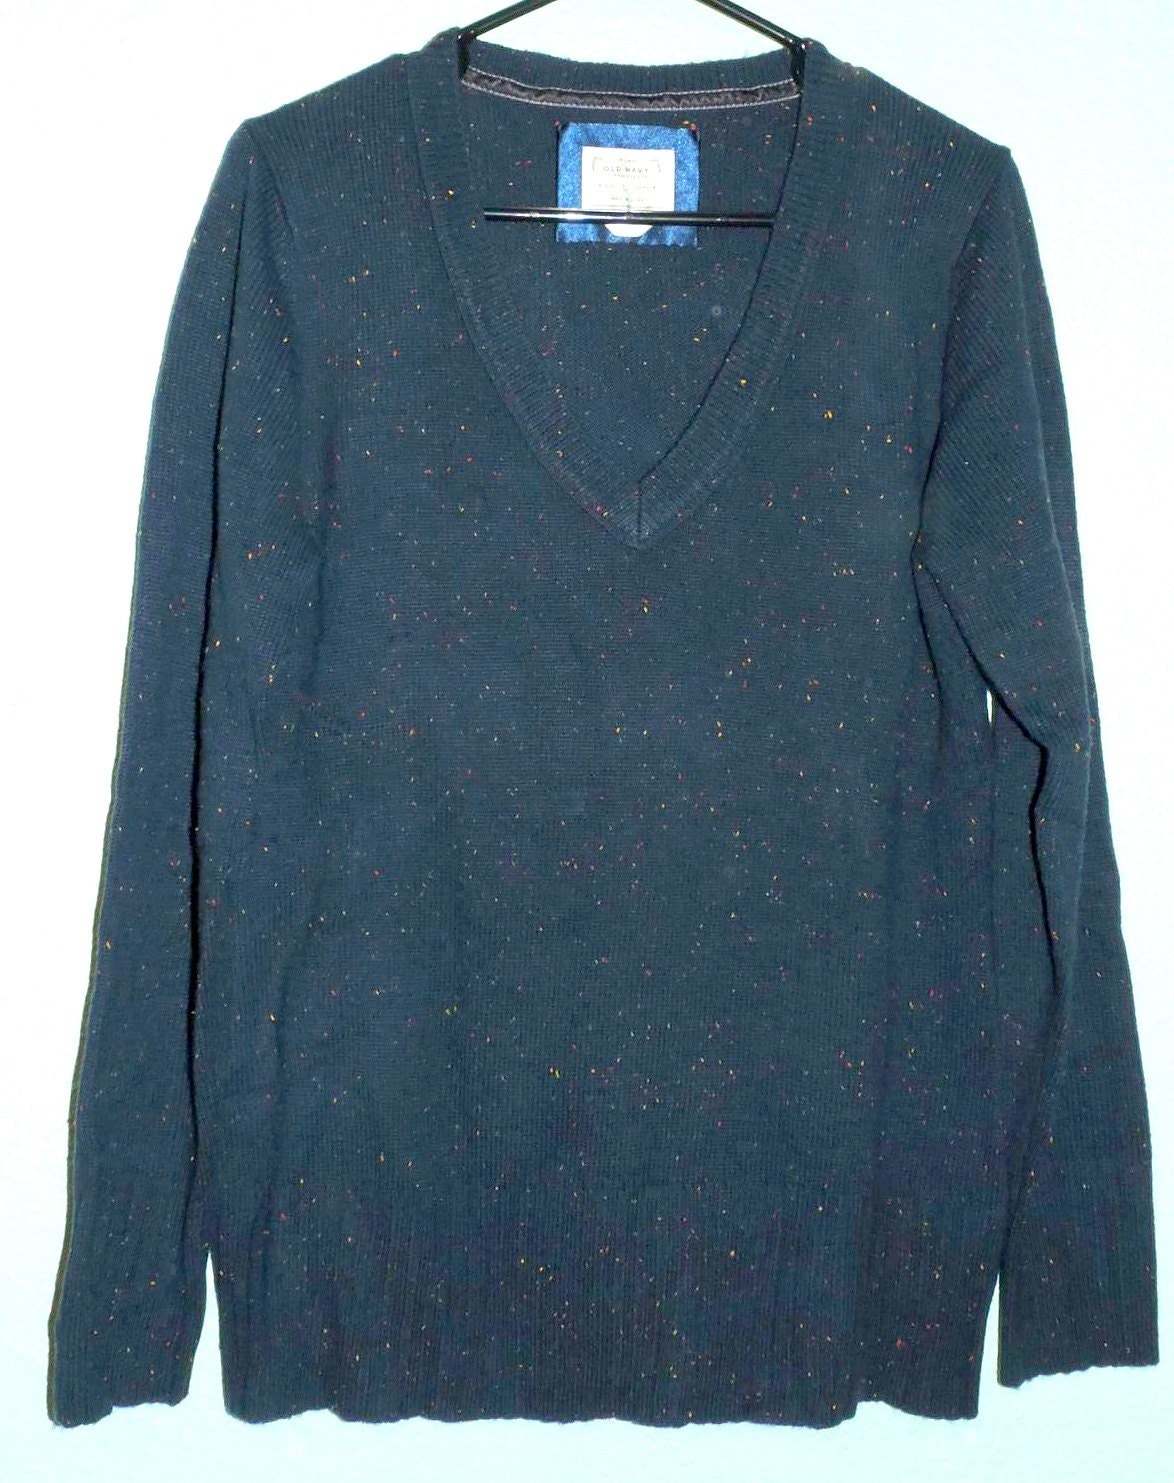 Ladies V-Neck Sweater by Old Navy Navy Blue Sz L